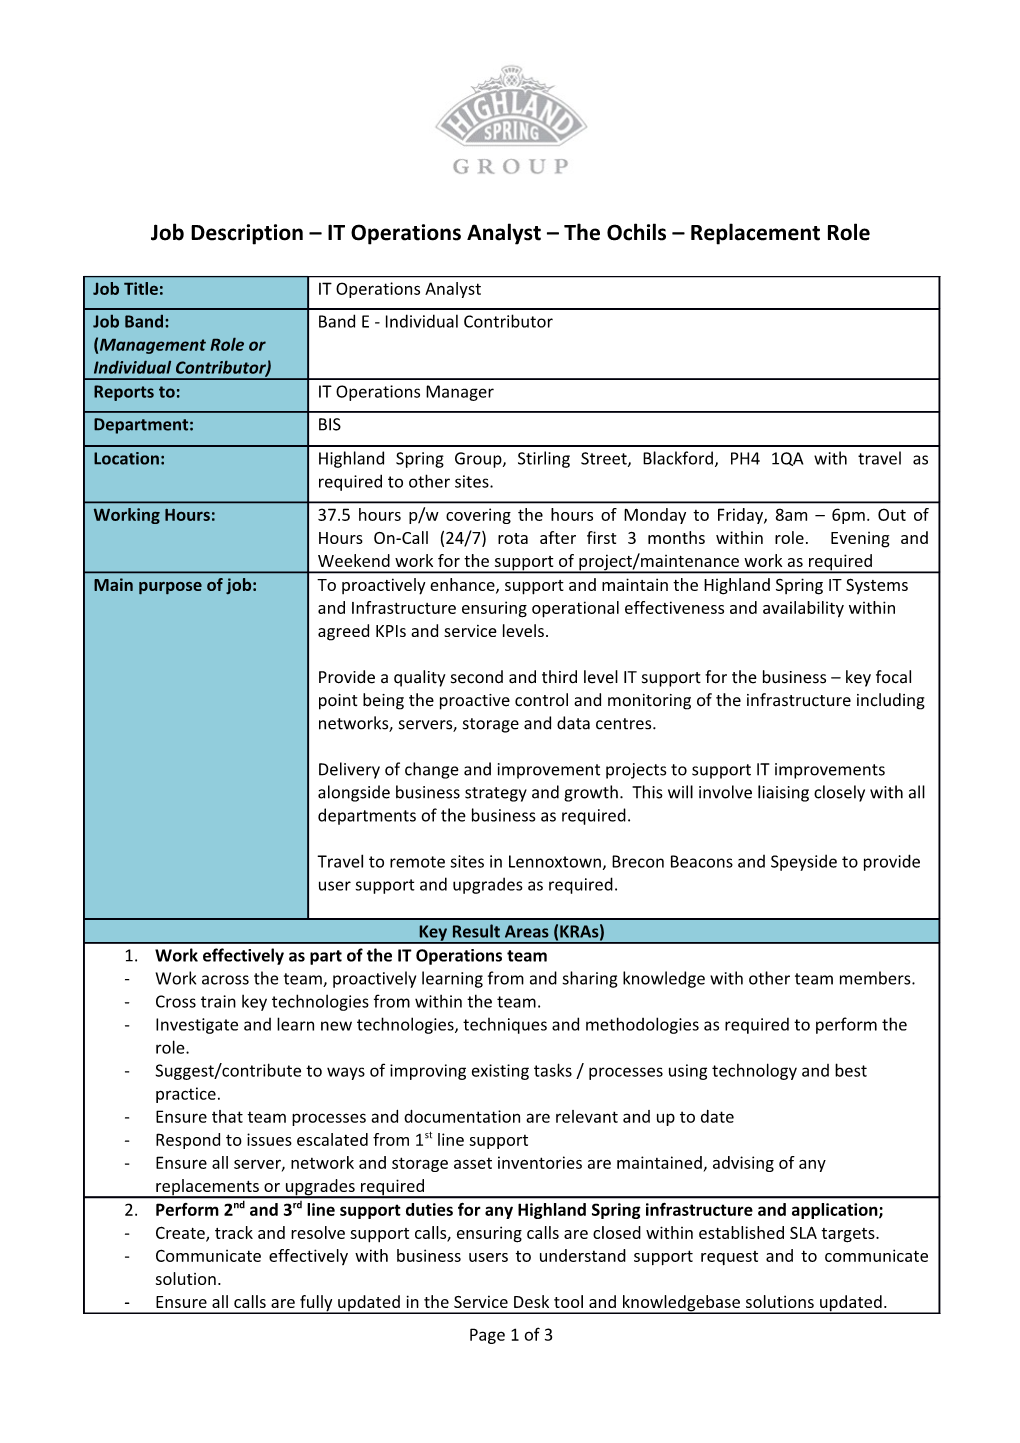 Job Description IT Operations Analyst the Ochils Replacement Role